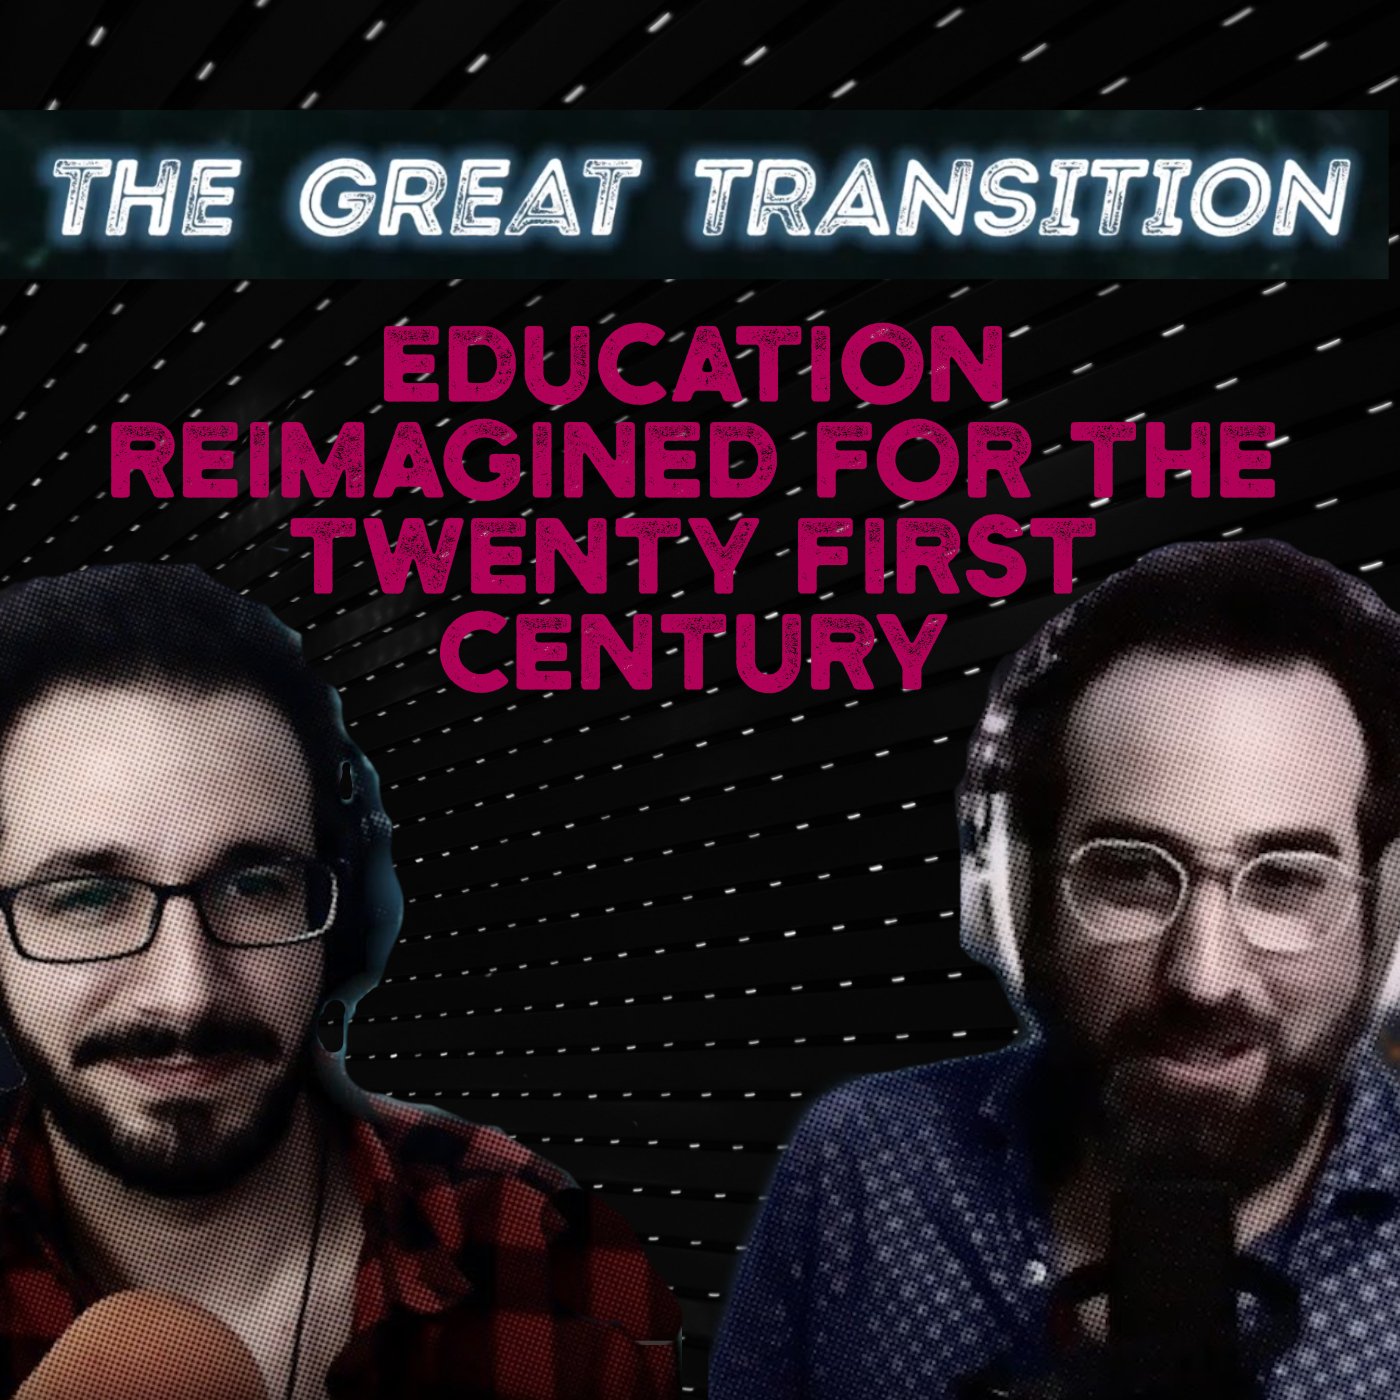 The Great Transition - Education Re-imagined for the 21st Century